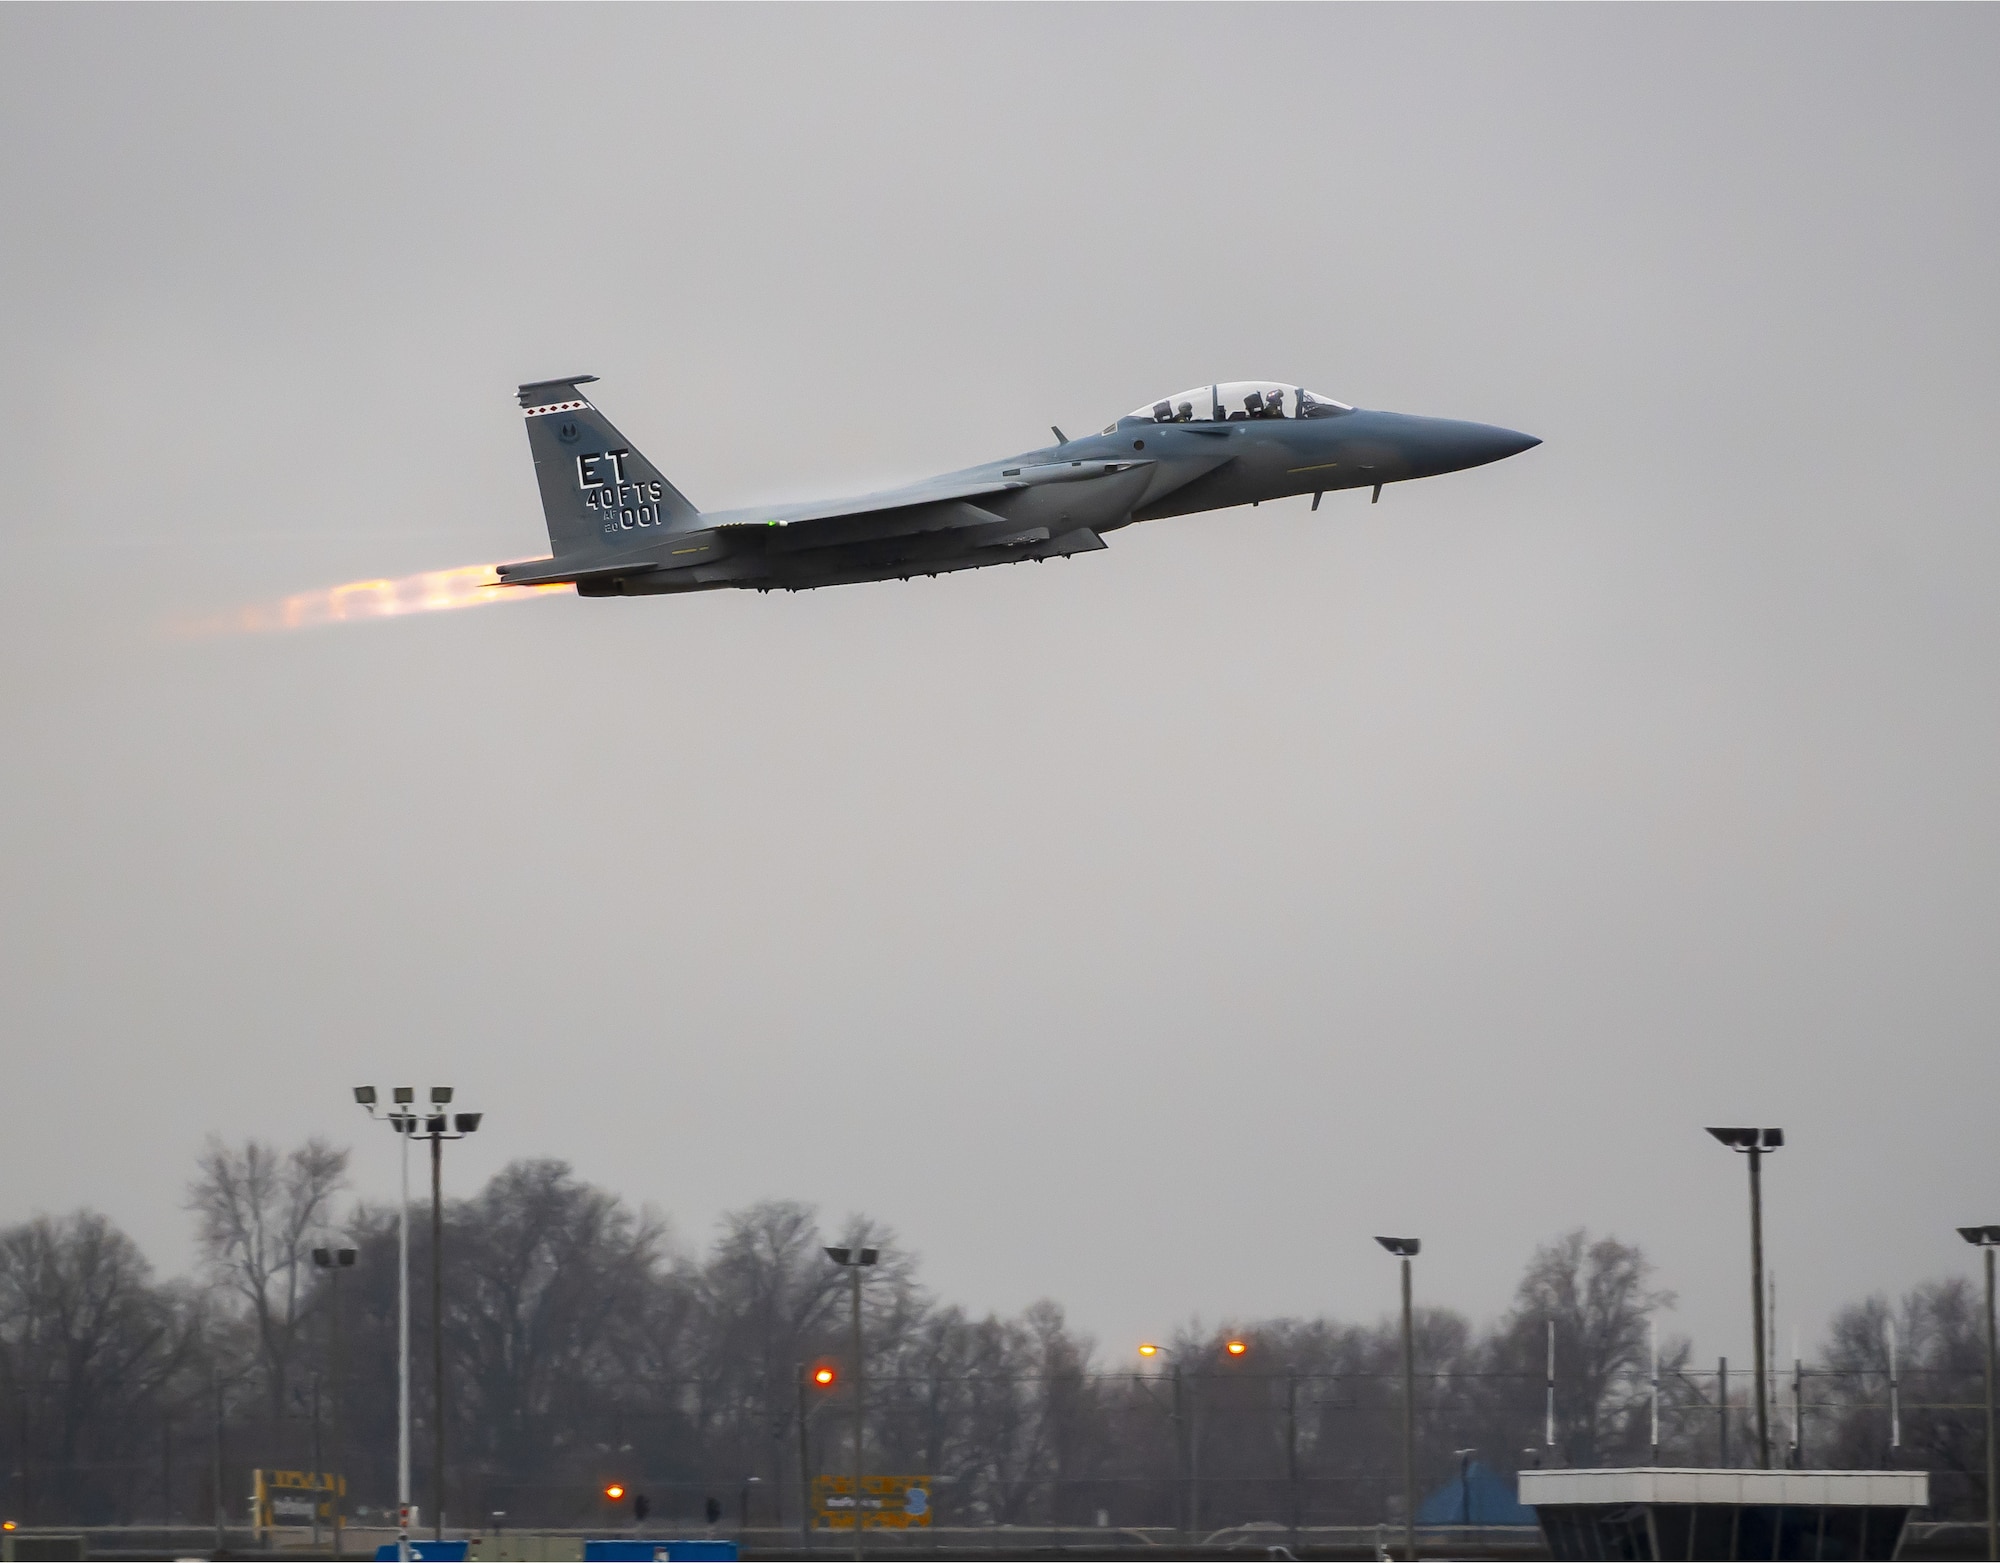 The first F-15EX departs a Boeing facility in St. Louis, Mo, in route to Eglin Air Force Base, Fla. (Photo by Boeing Co.)